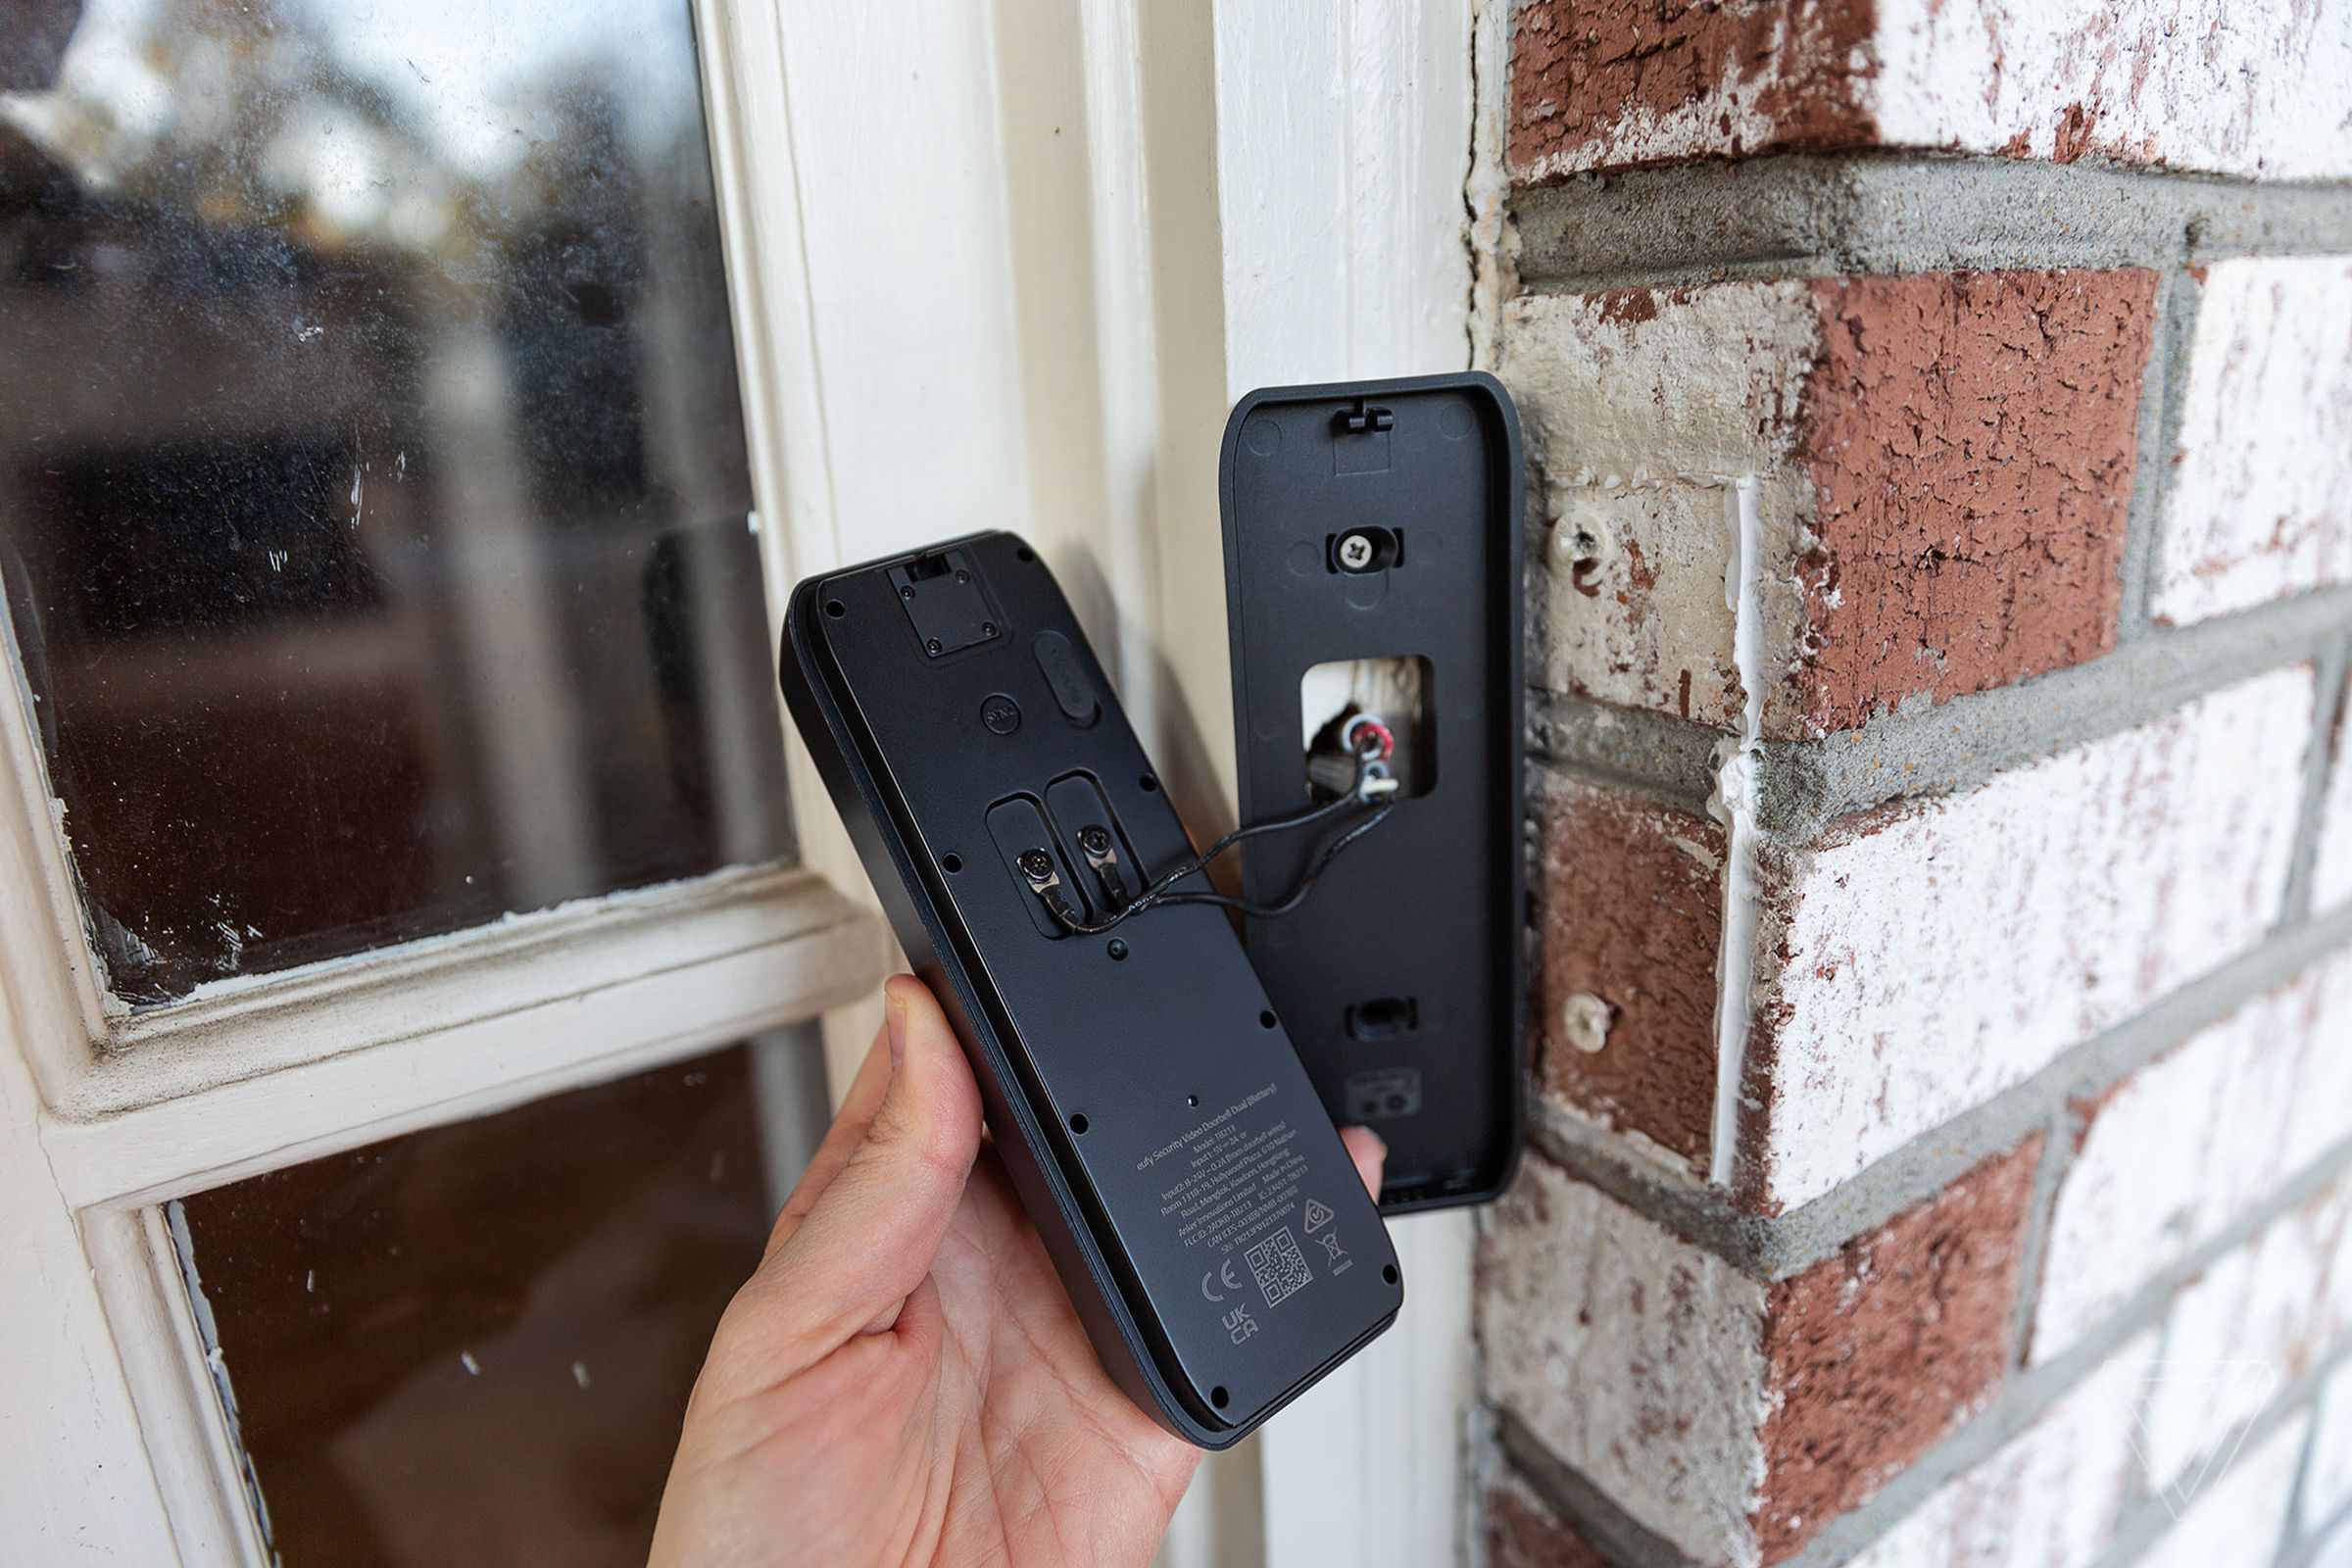 Most doorbells can be wired to existing doorbell wiring, but only true wired doorbells are powered by your home’s electricity. Battery-powered doorbells are just trickle-charged when wired.